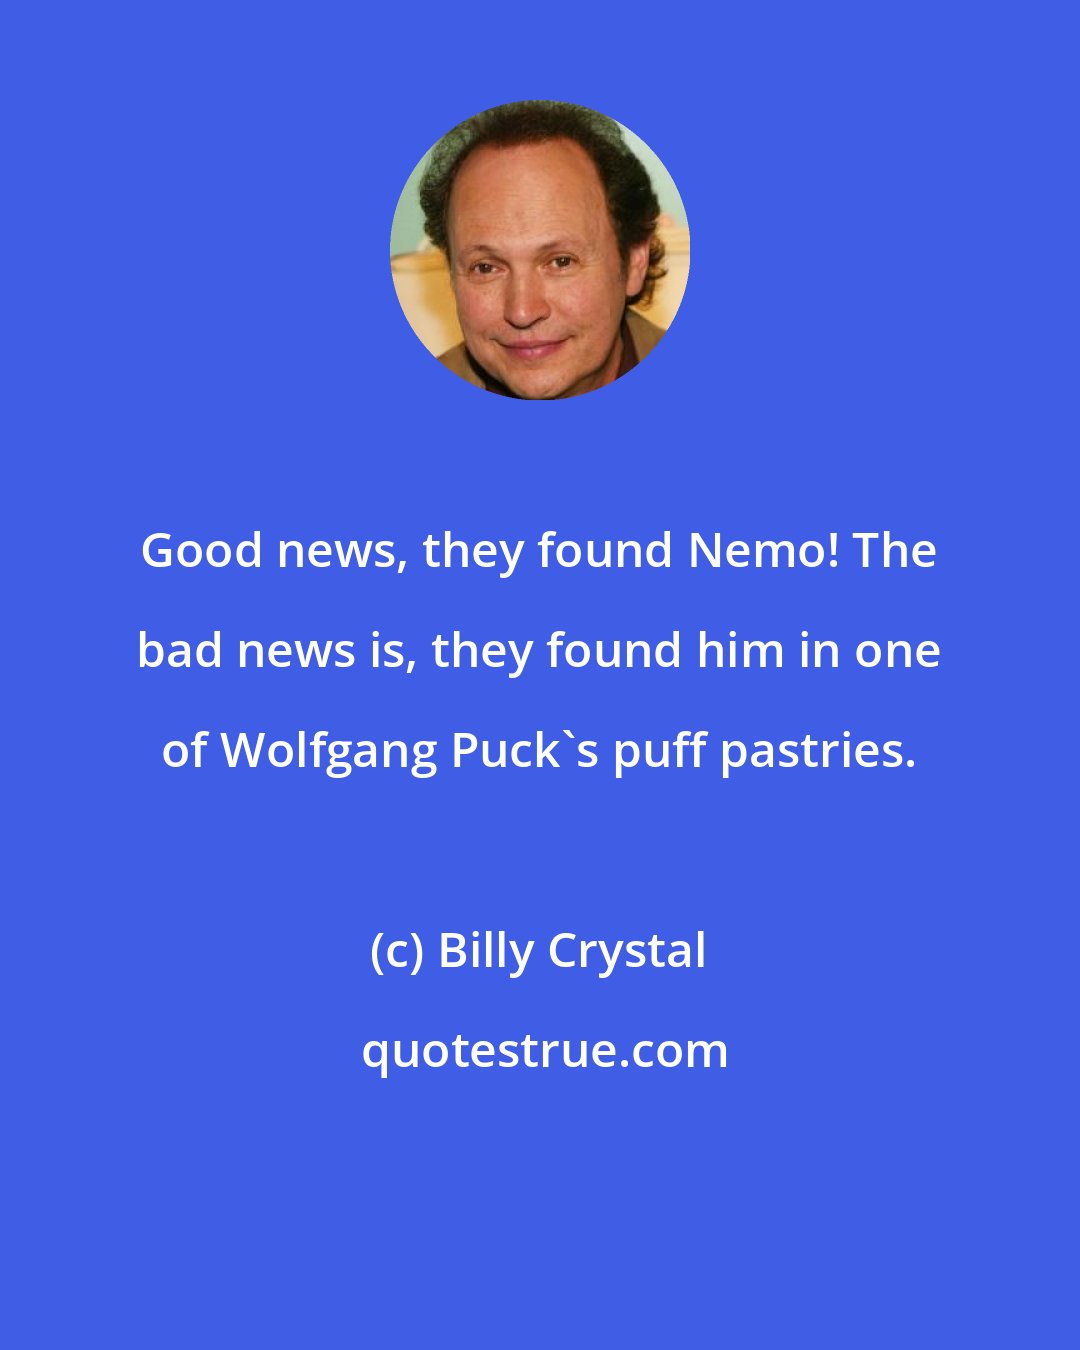 Billy Crystal: Good news, they found Nemo! The bad news is, they found him in one of Wolfgang Puck's puff pastries.